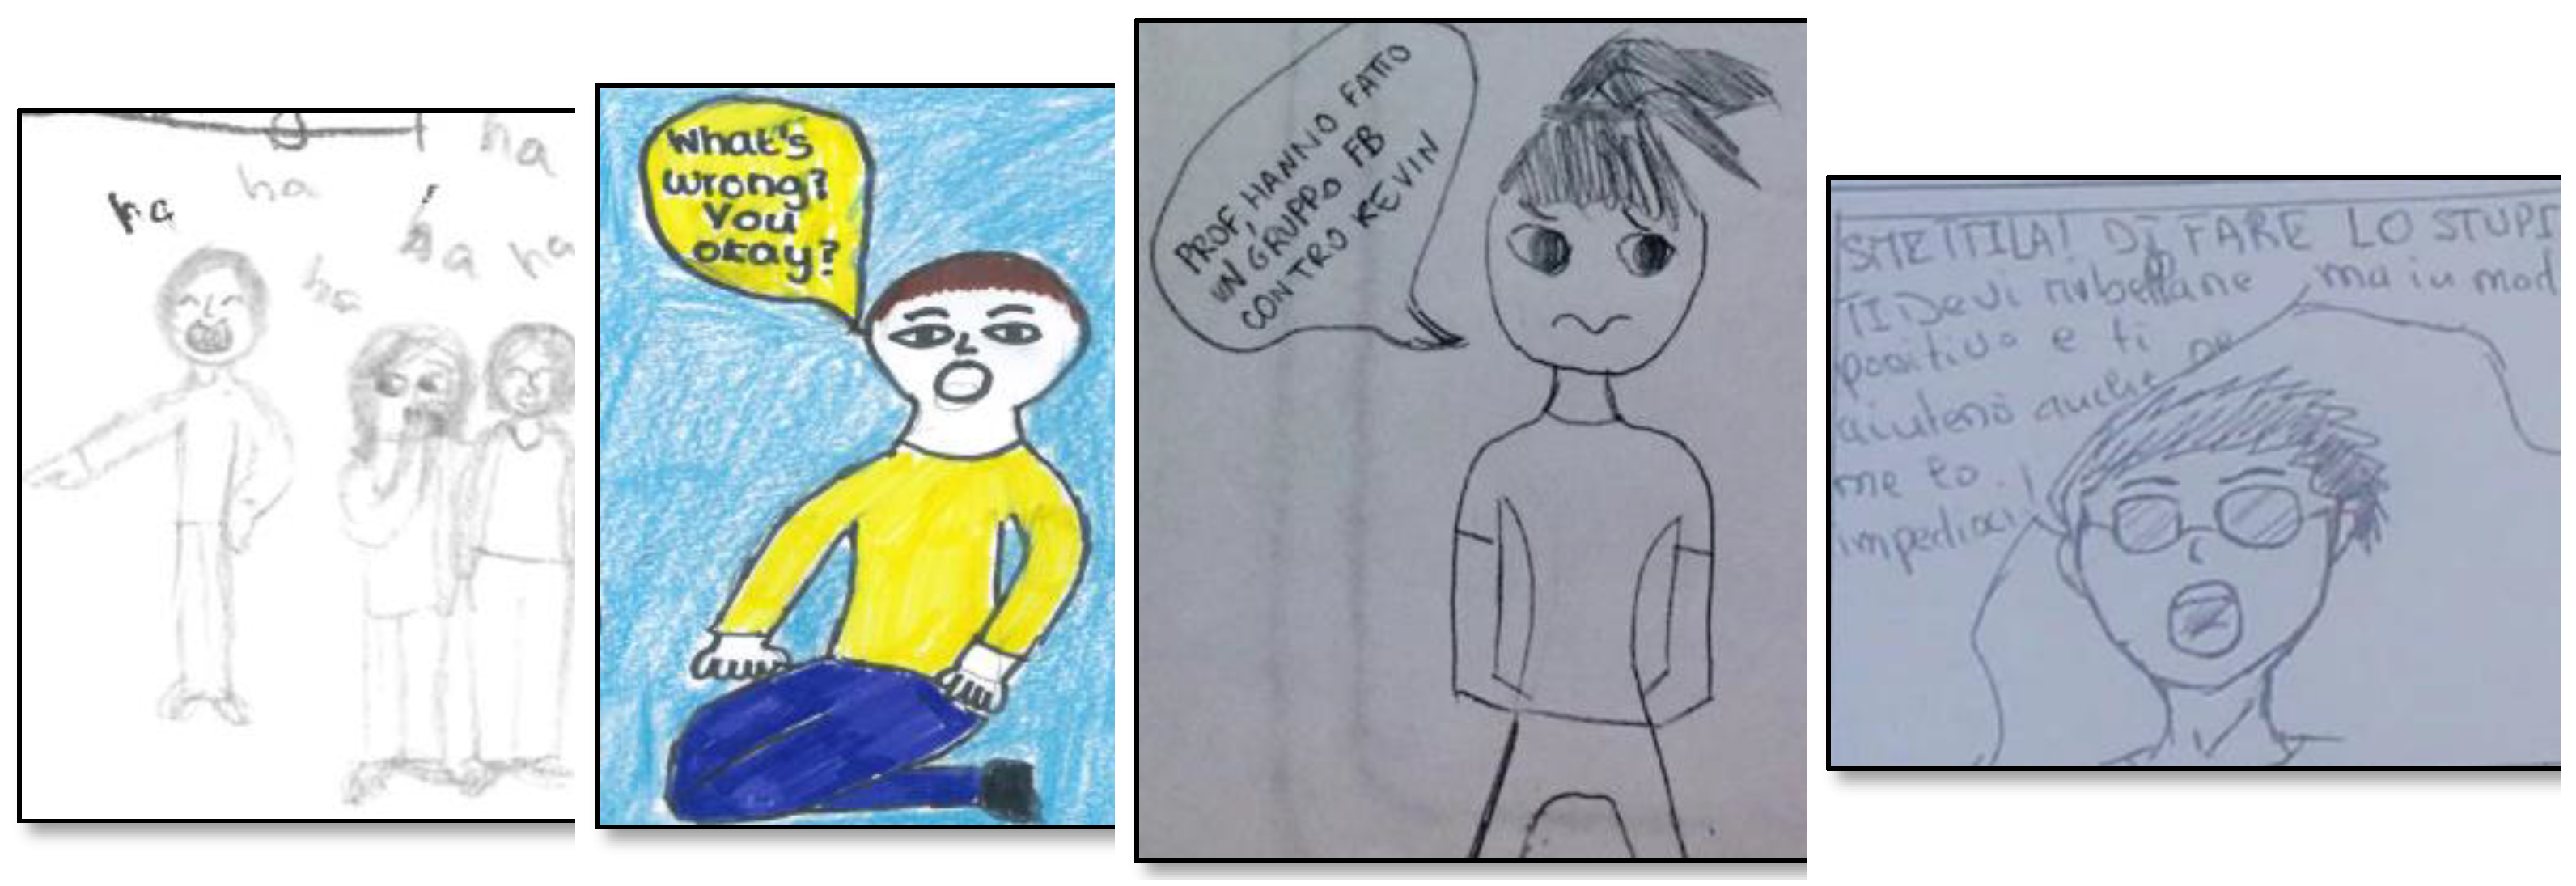 64 Hilariously Inappropriate Kids' Drawings